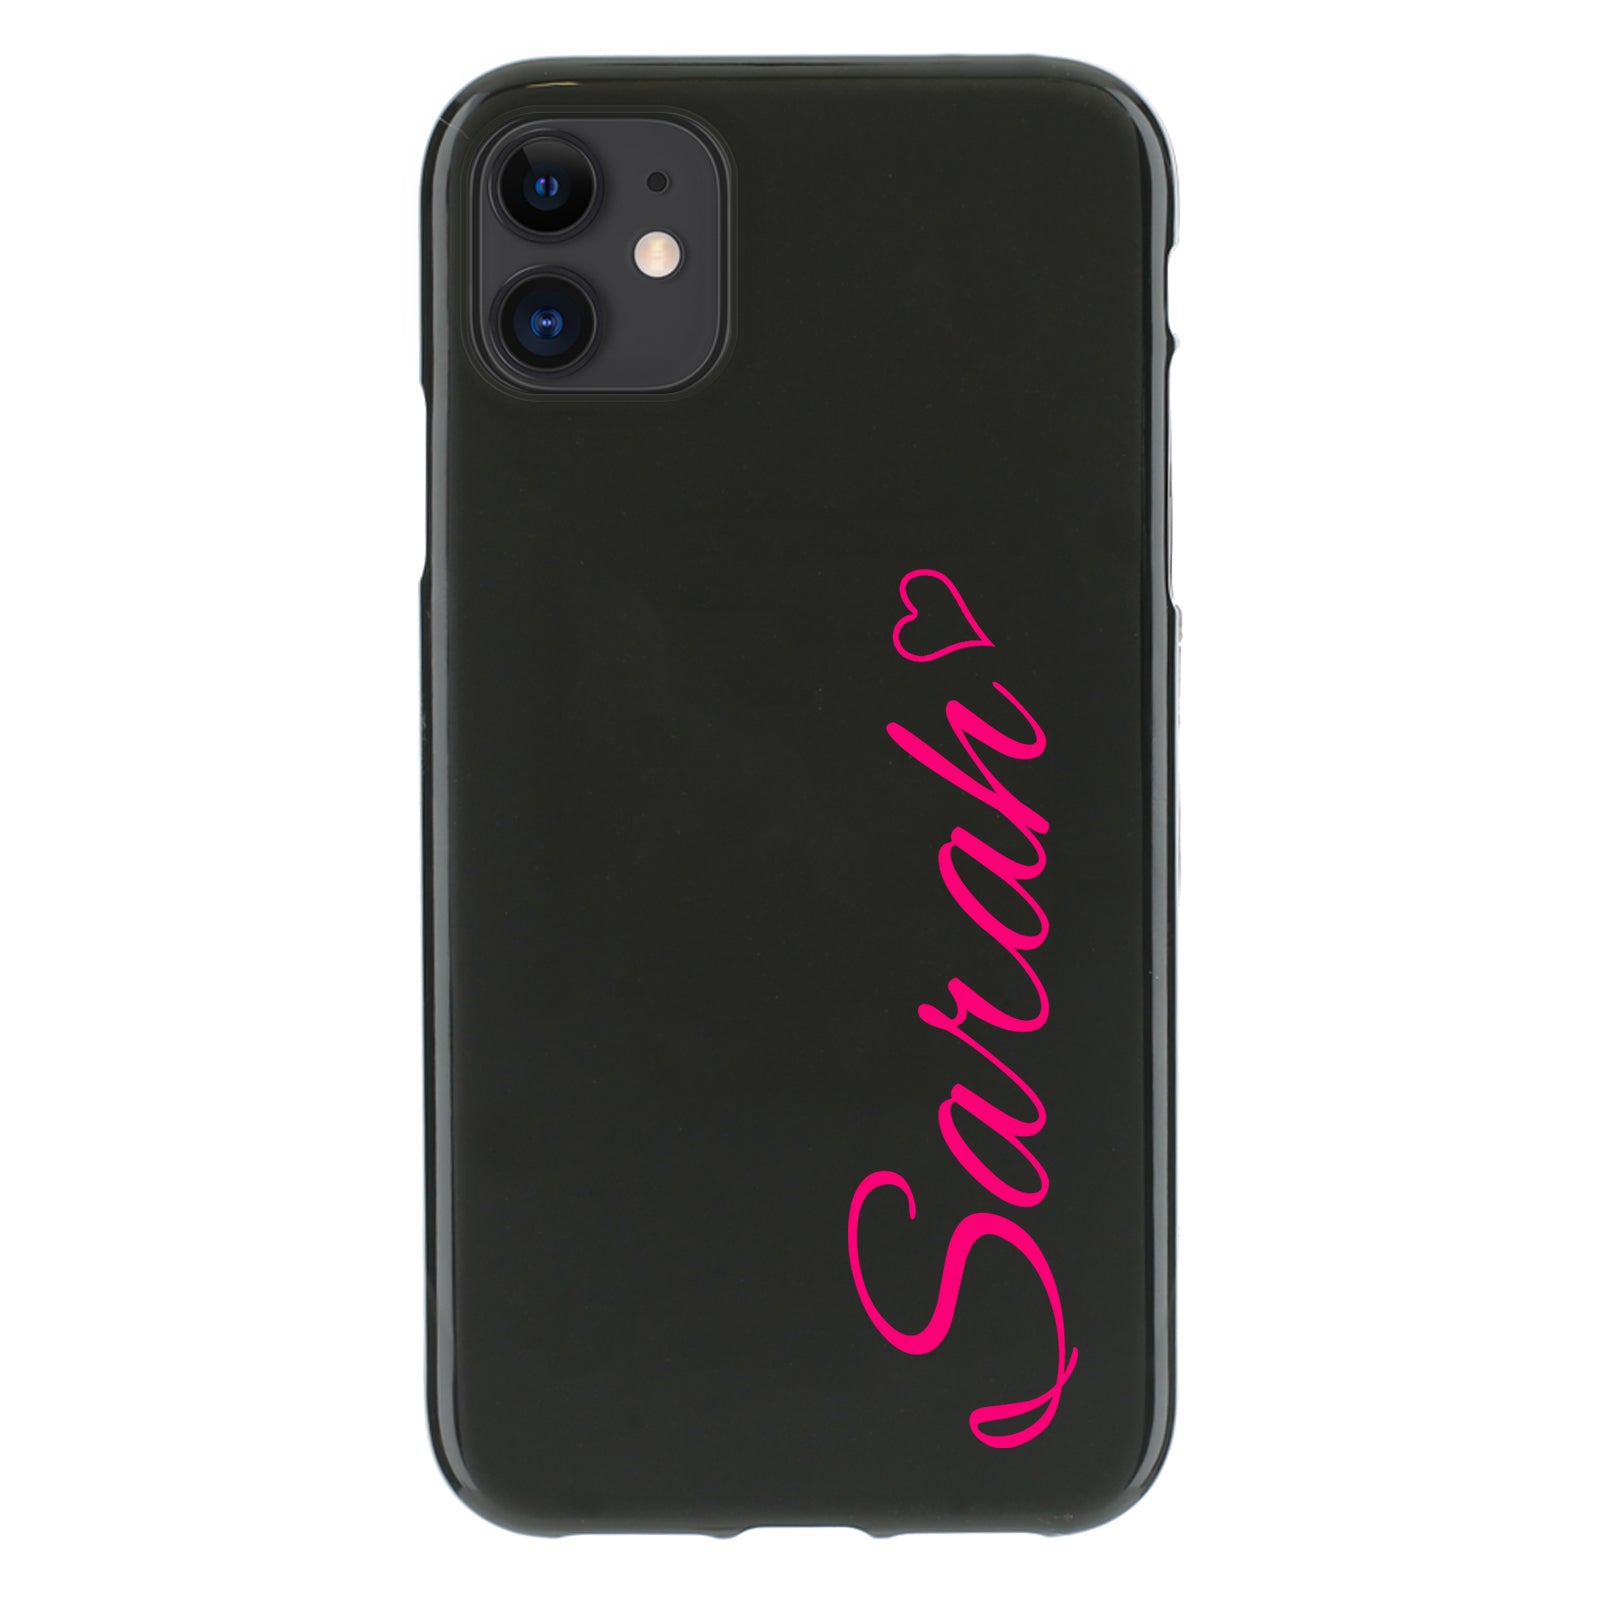 Personalised Nokia Phone Gel Case with Hot Pink Heart Accented Text